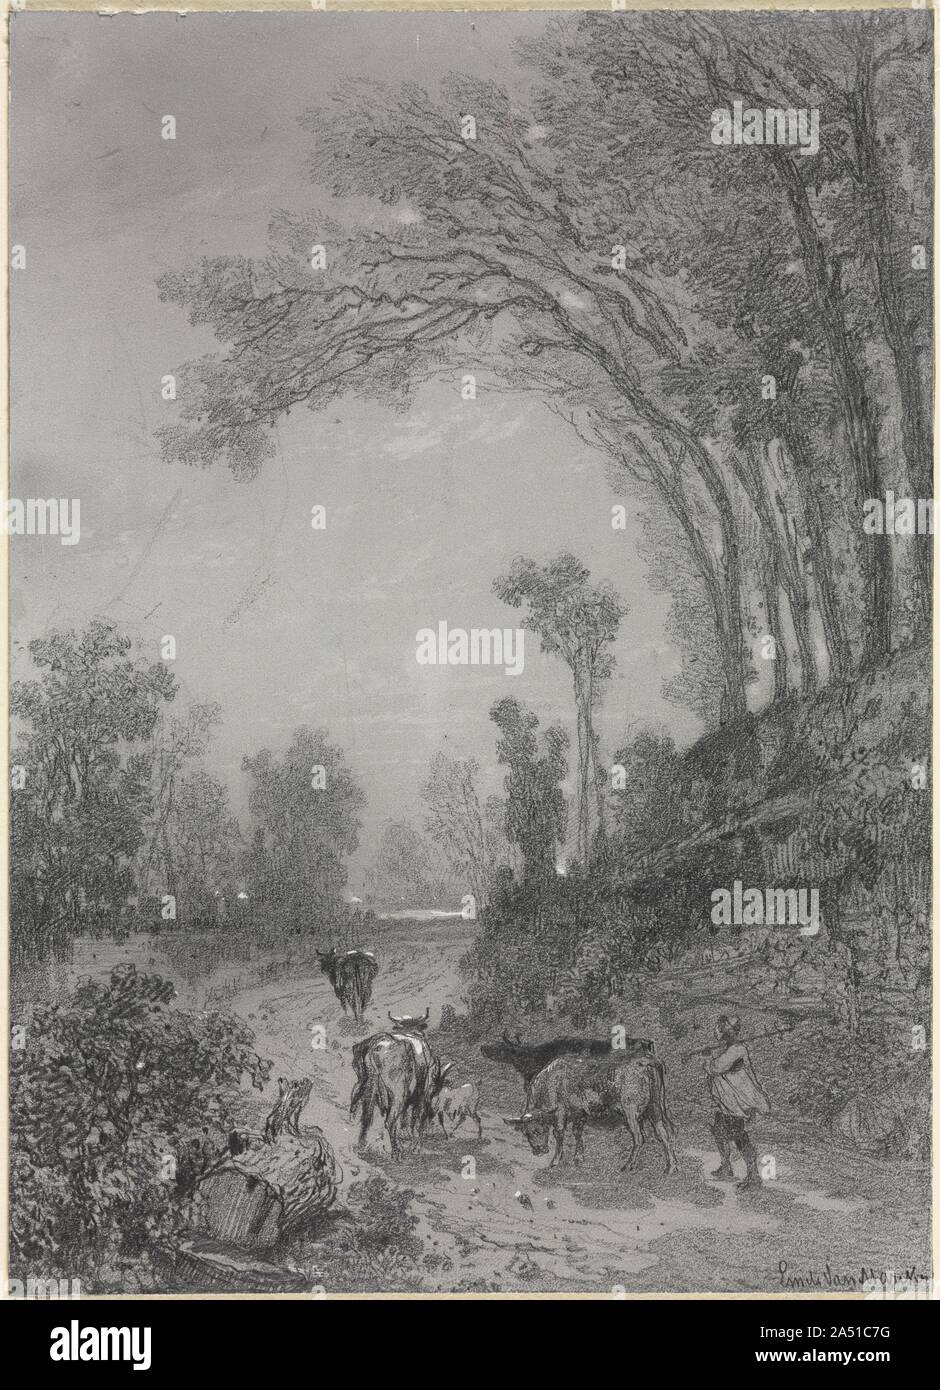 Landscape with Cows, second half 19th century. Stock Photo